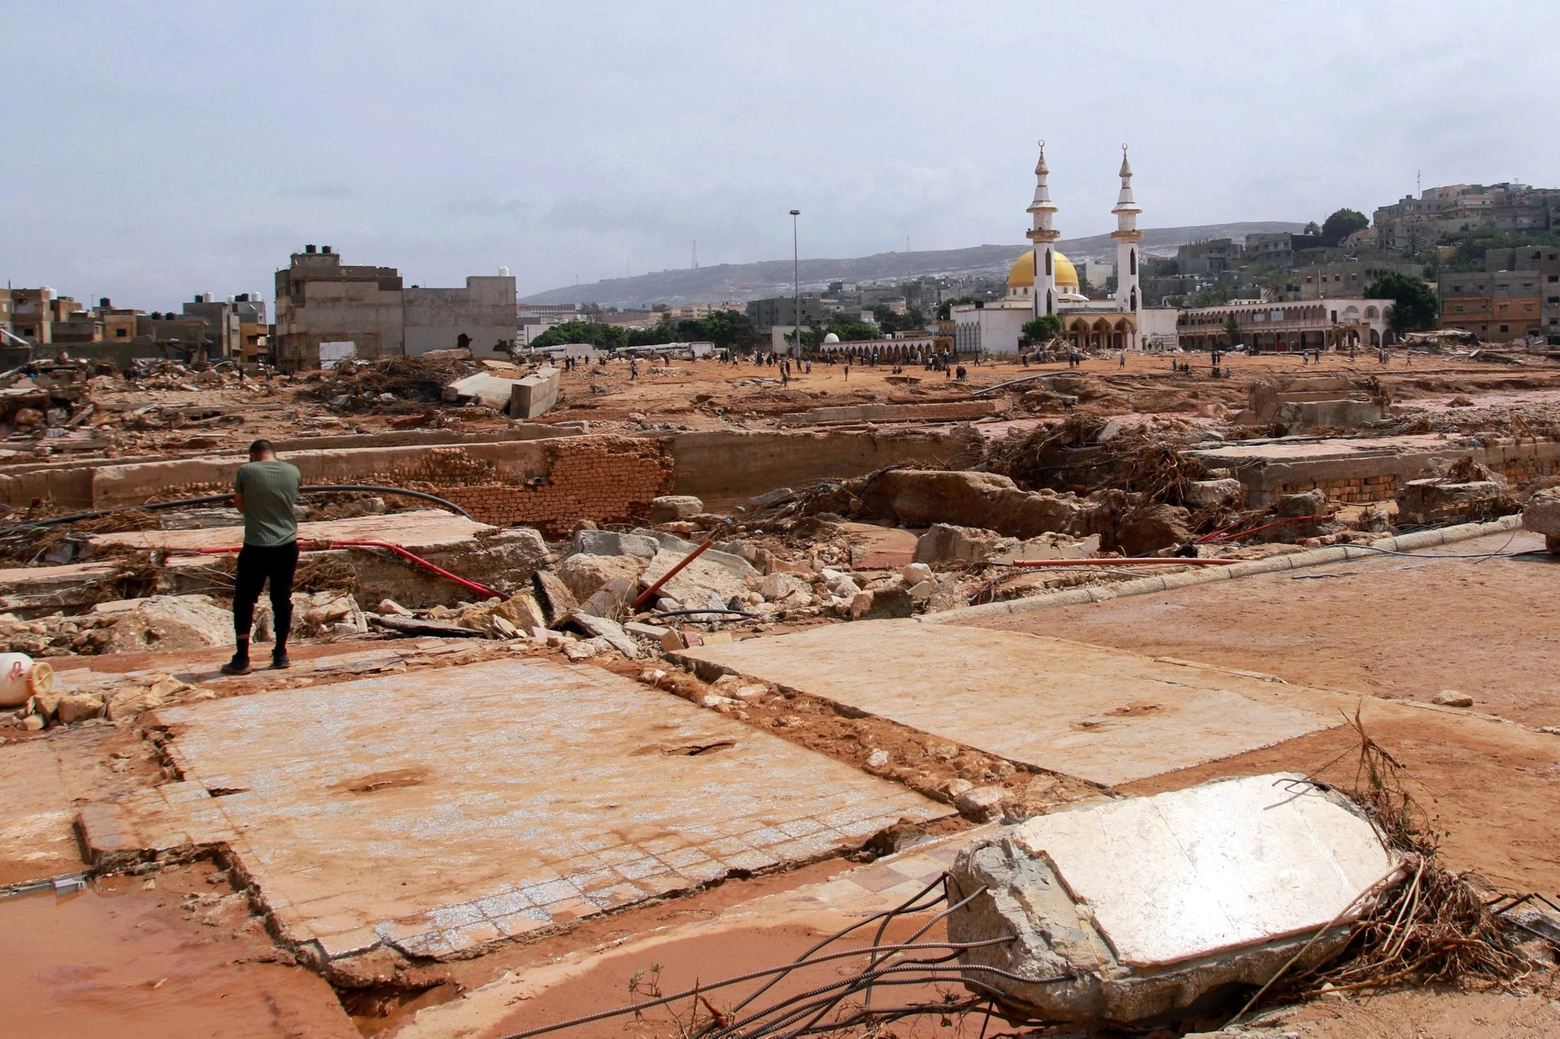 A man looks at the damage caused by freak floods in Derna, eastern Libya, on September 11, 2023. The death toll from freak floods in eastern Libya is expected to soar dramatically, with 10,000 people reported missing, the Red Cross warned on September 12. Officials in Libya have said at least 150 people were killed in the sudden flooding on Sunday afternoon after storm Daniel swept the Mediterranean, lashing Bulgaria, Greece and Turkey. (Photo by AFP)